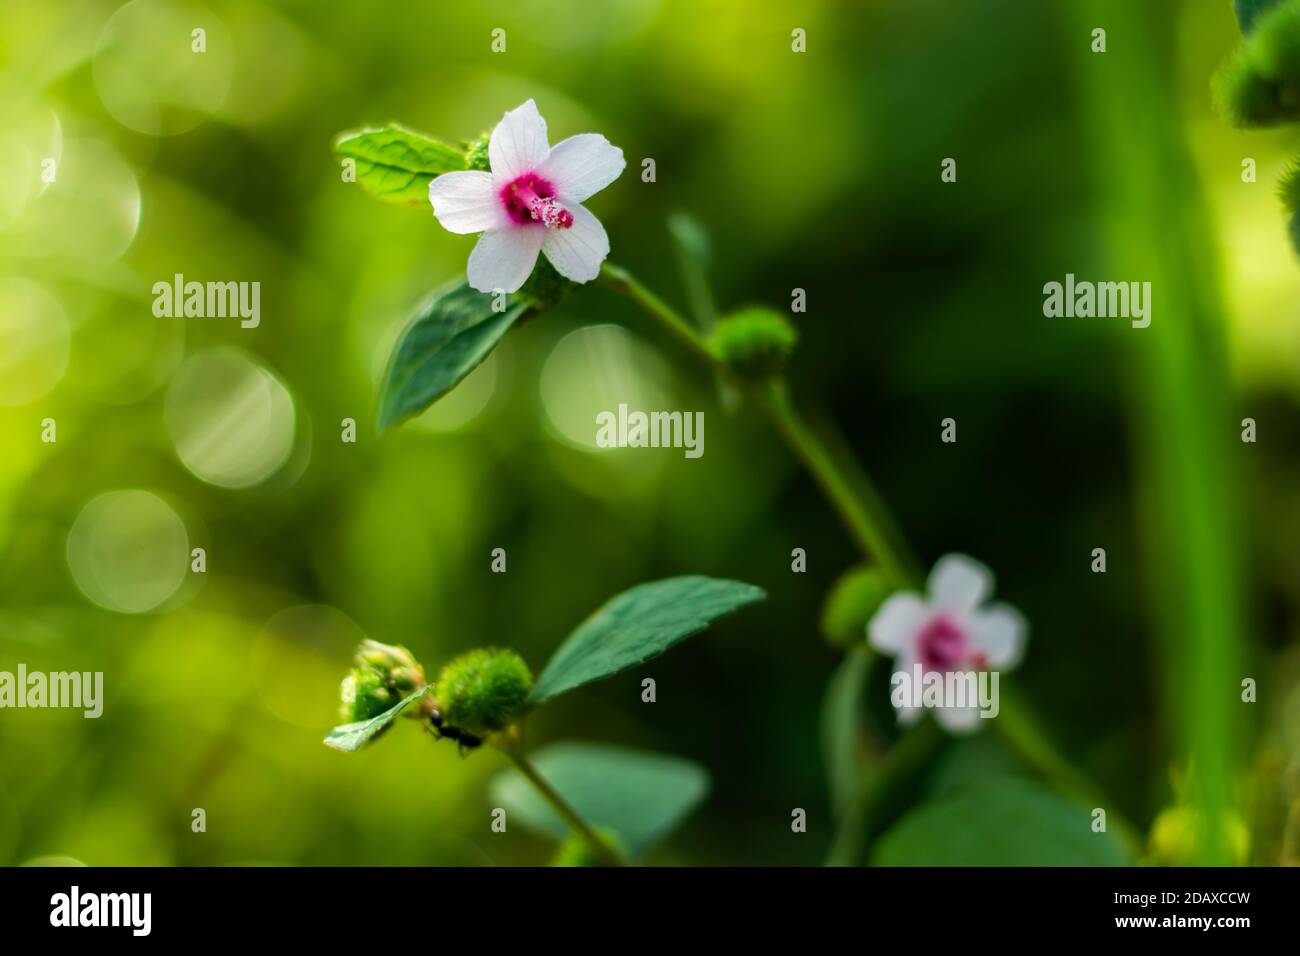 White and pink color small nice grass flowers green bg and isolated Stock Photo